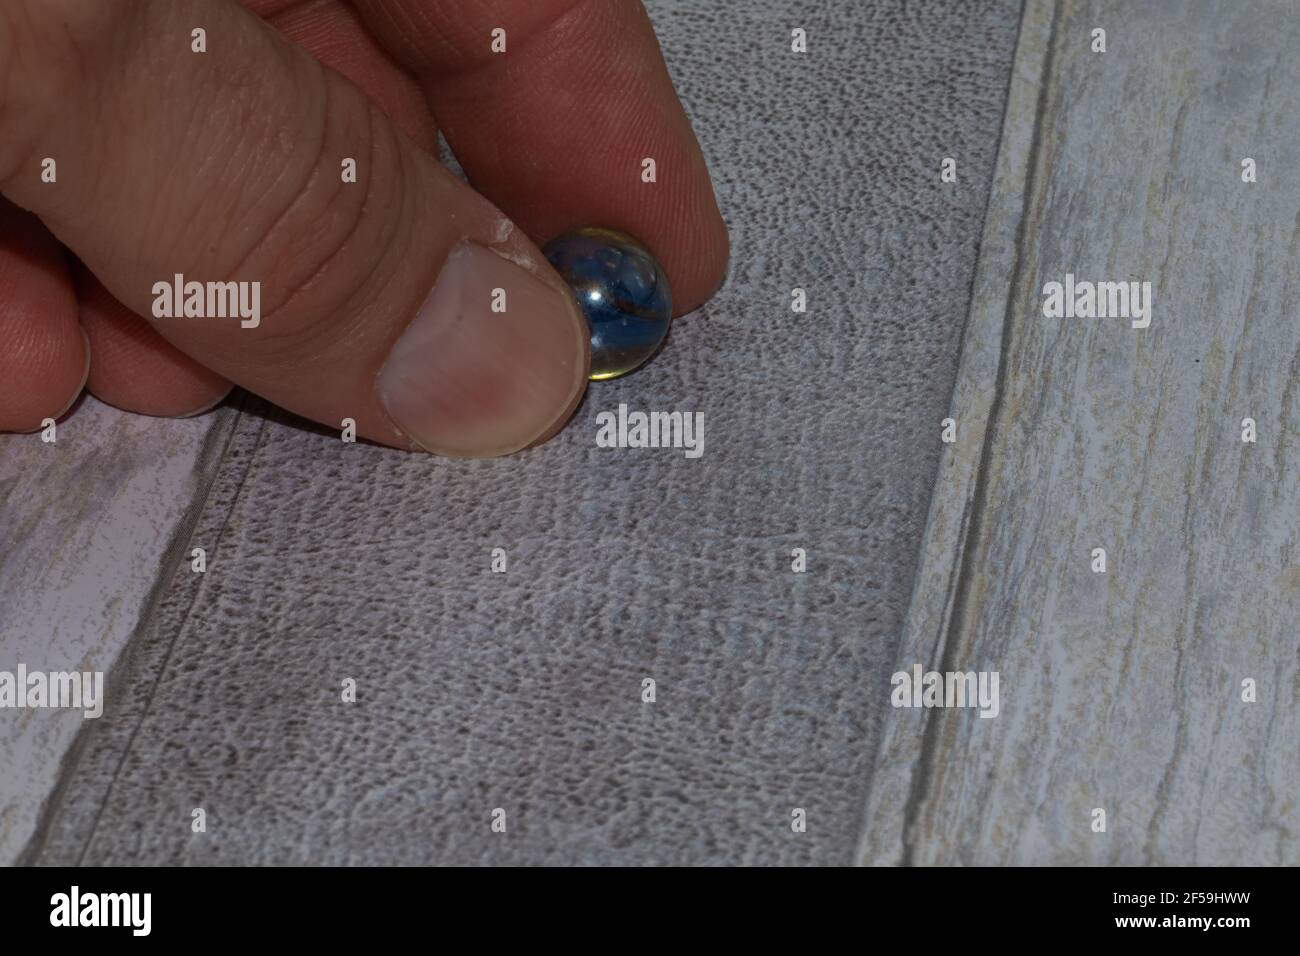 glass marble held by fingers on wooden background Stock Photo